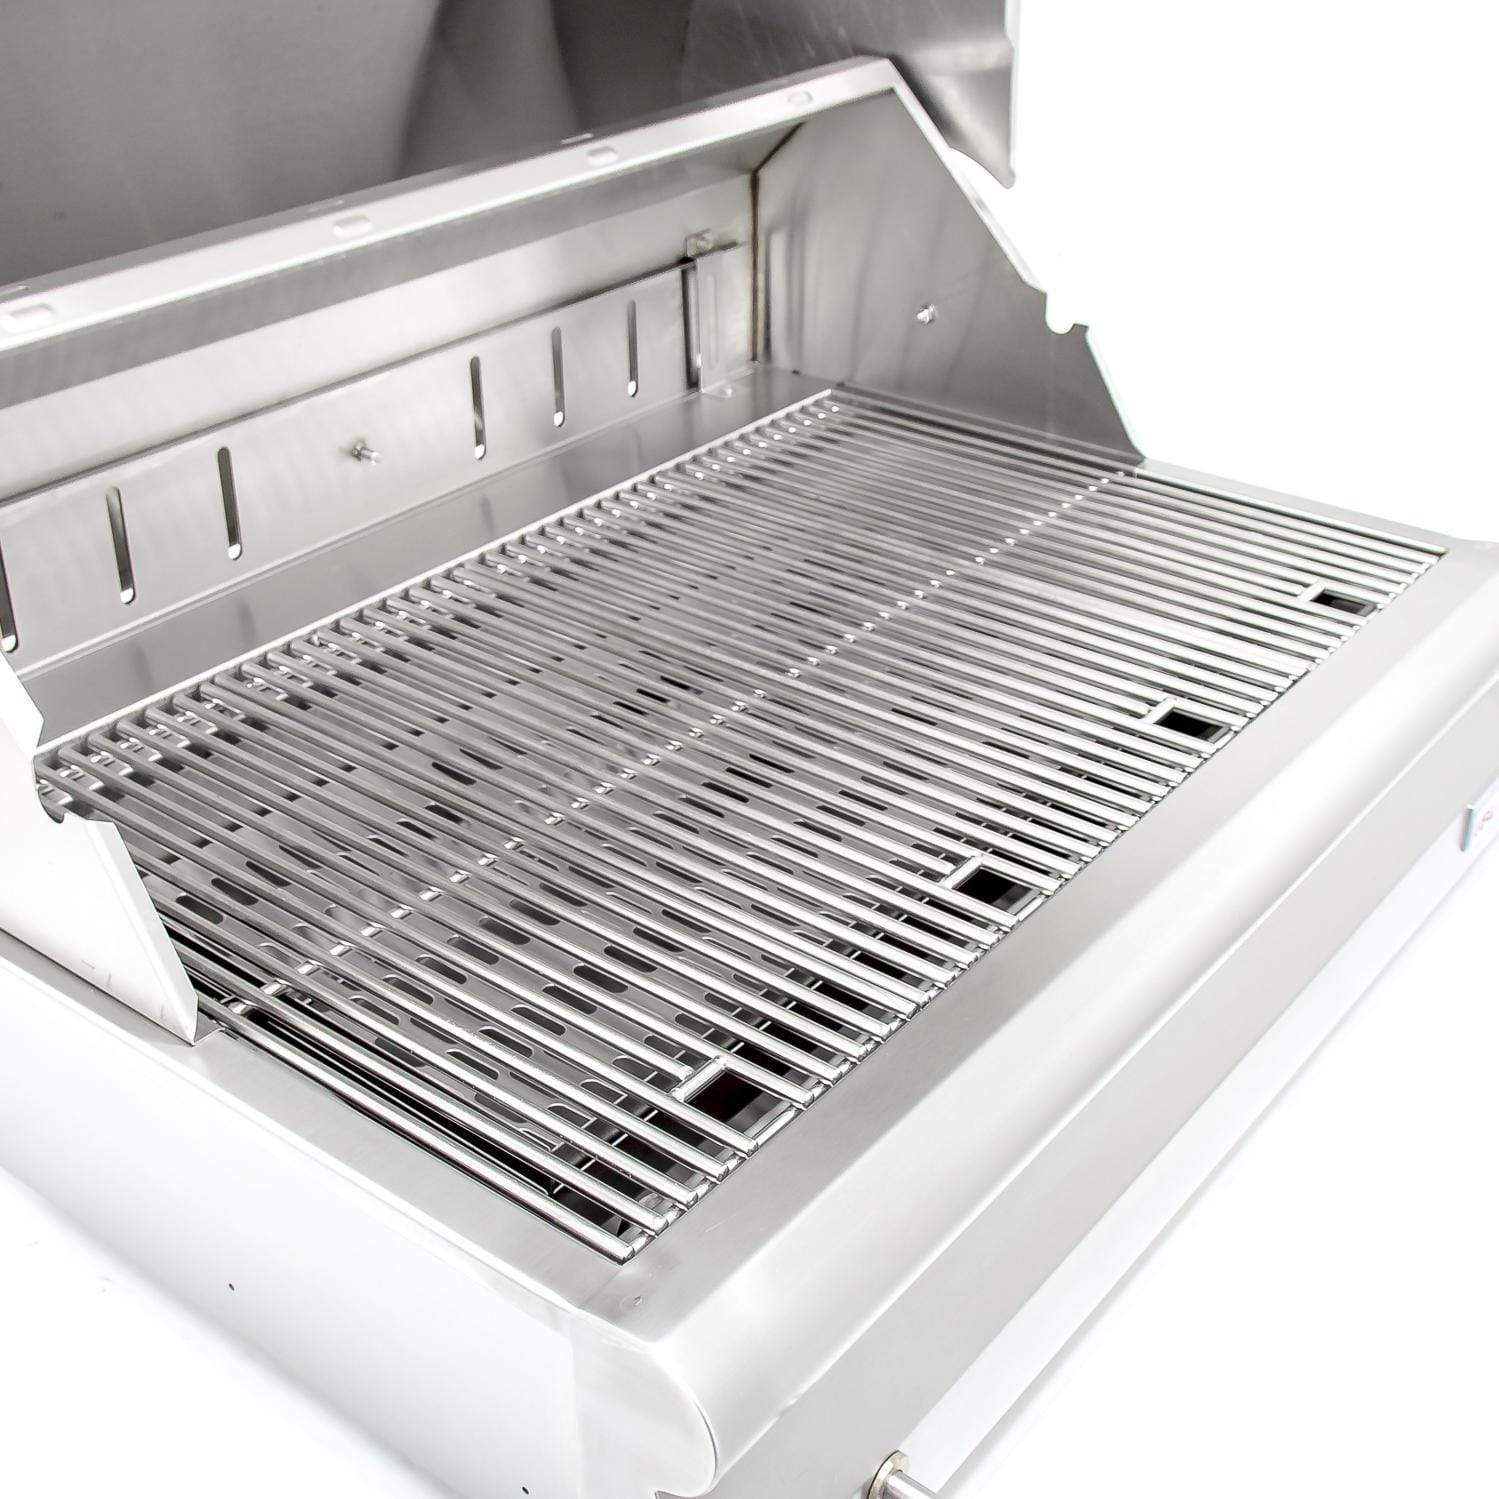 Blaze Charcoal Grill 32" Built in Charcoal Grill